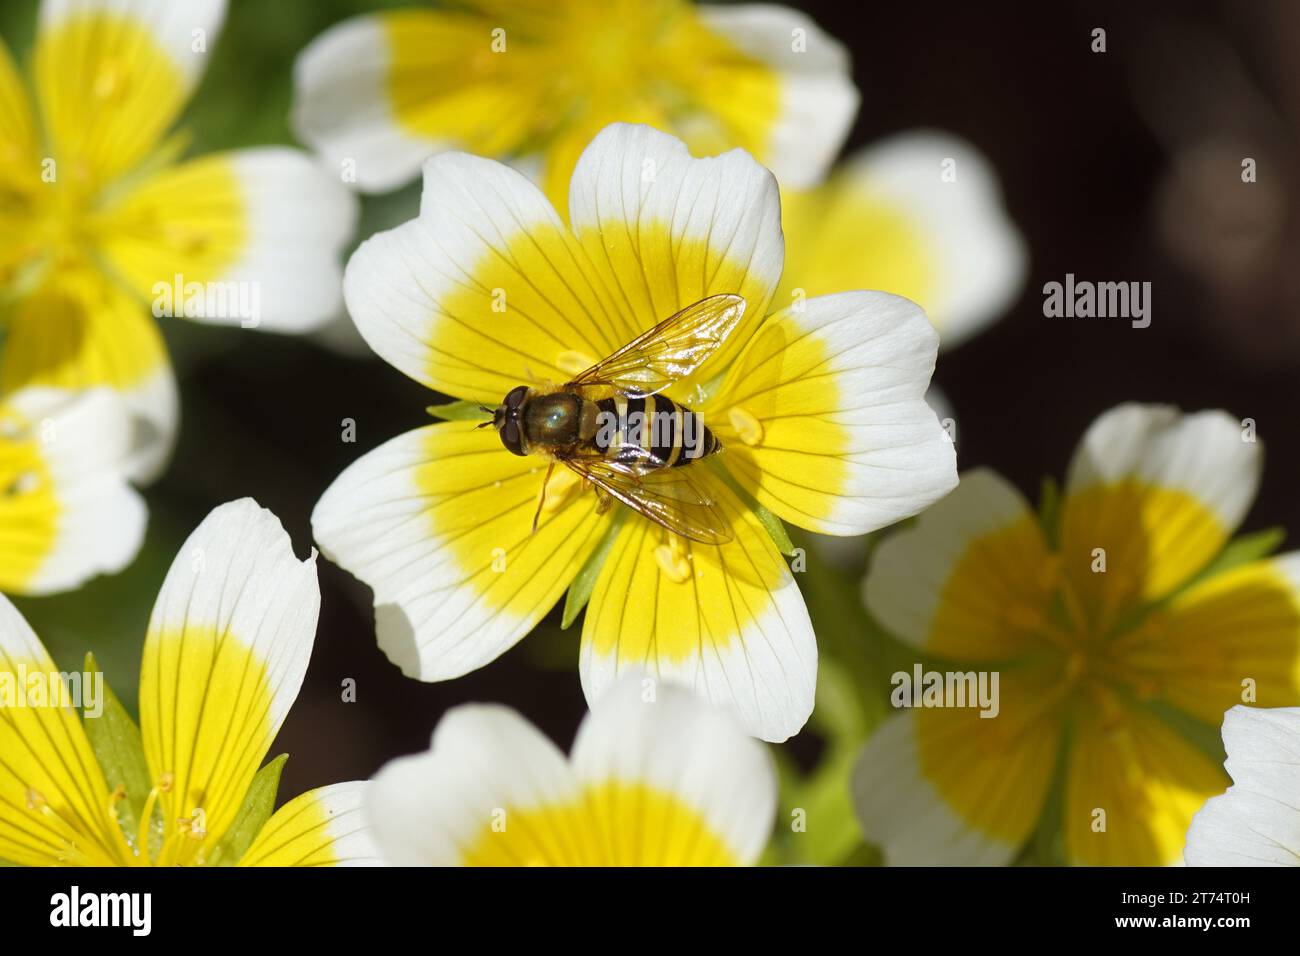 Female hoverfly Syrphus ribesii, family Syrphidae on flowers of Douglas' meadowfoam, poached egg plant (Limnanthes douglasii), family meadowfoam Stock Photo